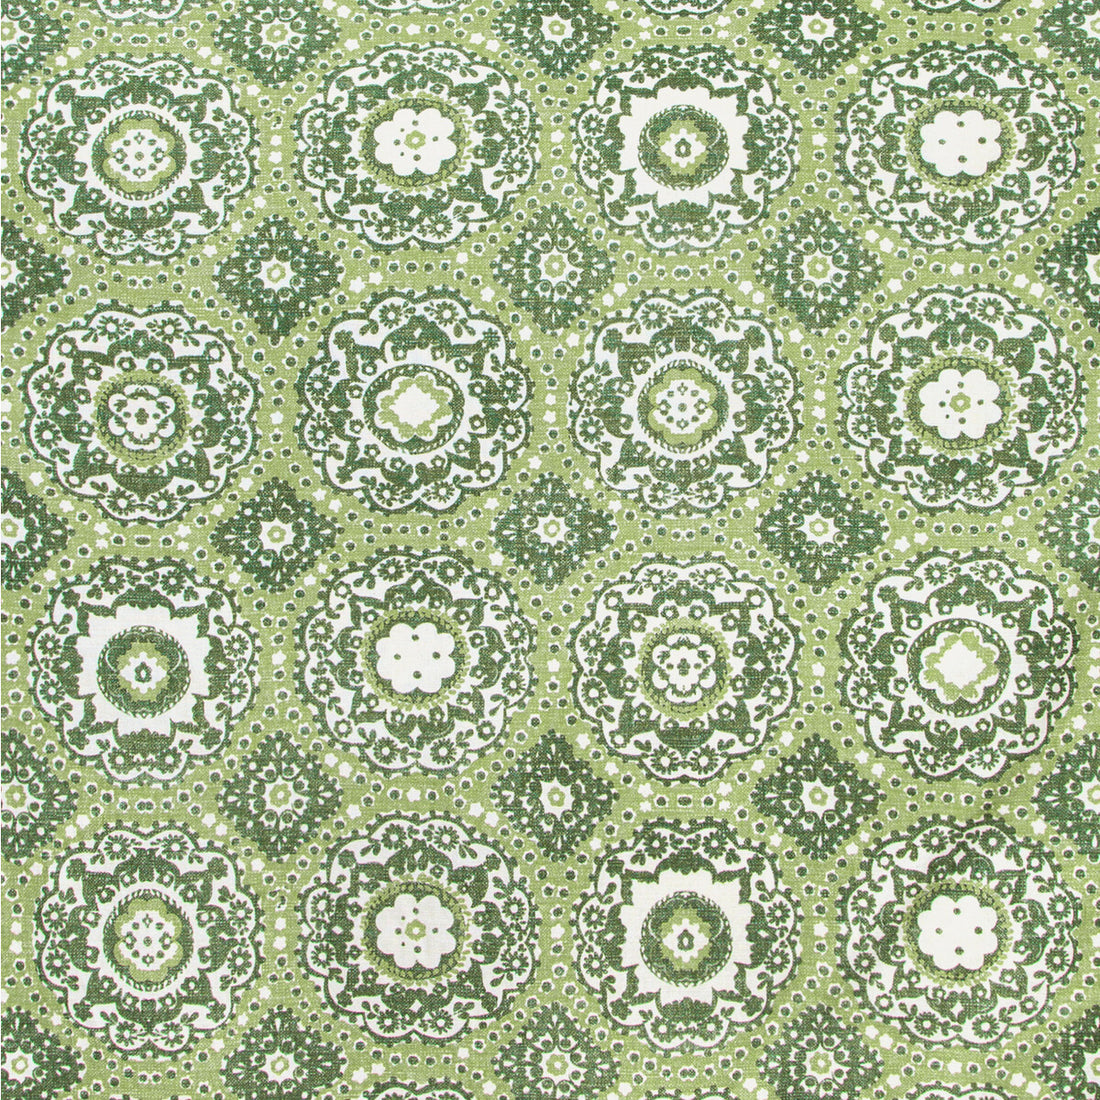 Bayview Print fabric in spring color - pattern 2020190.3.0 - by Lee Jofa in the Avondale collection